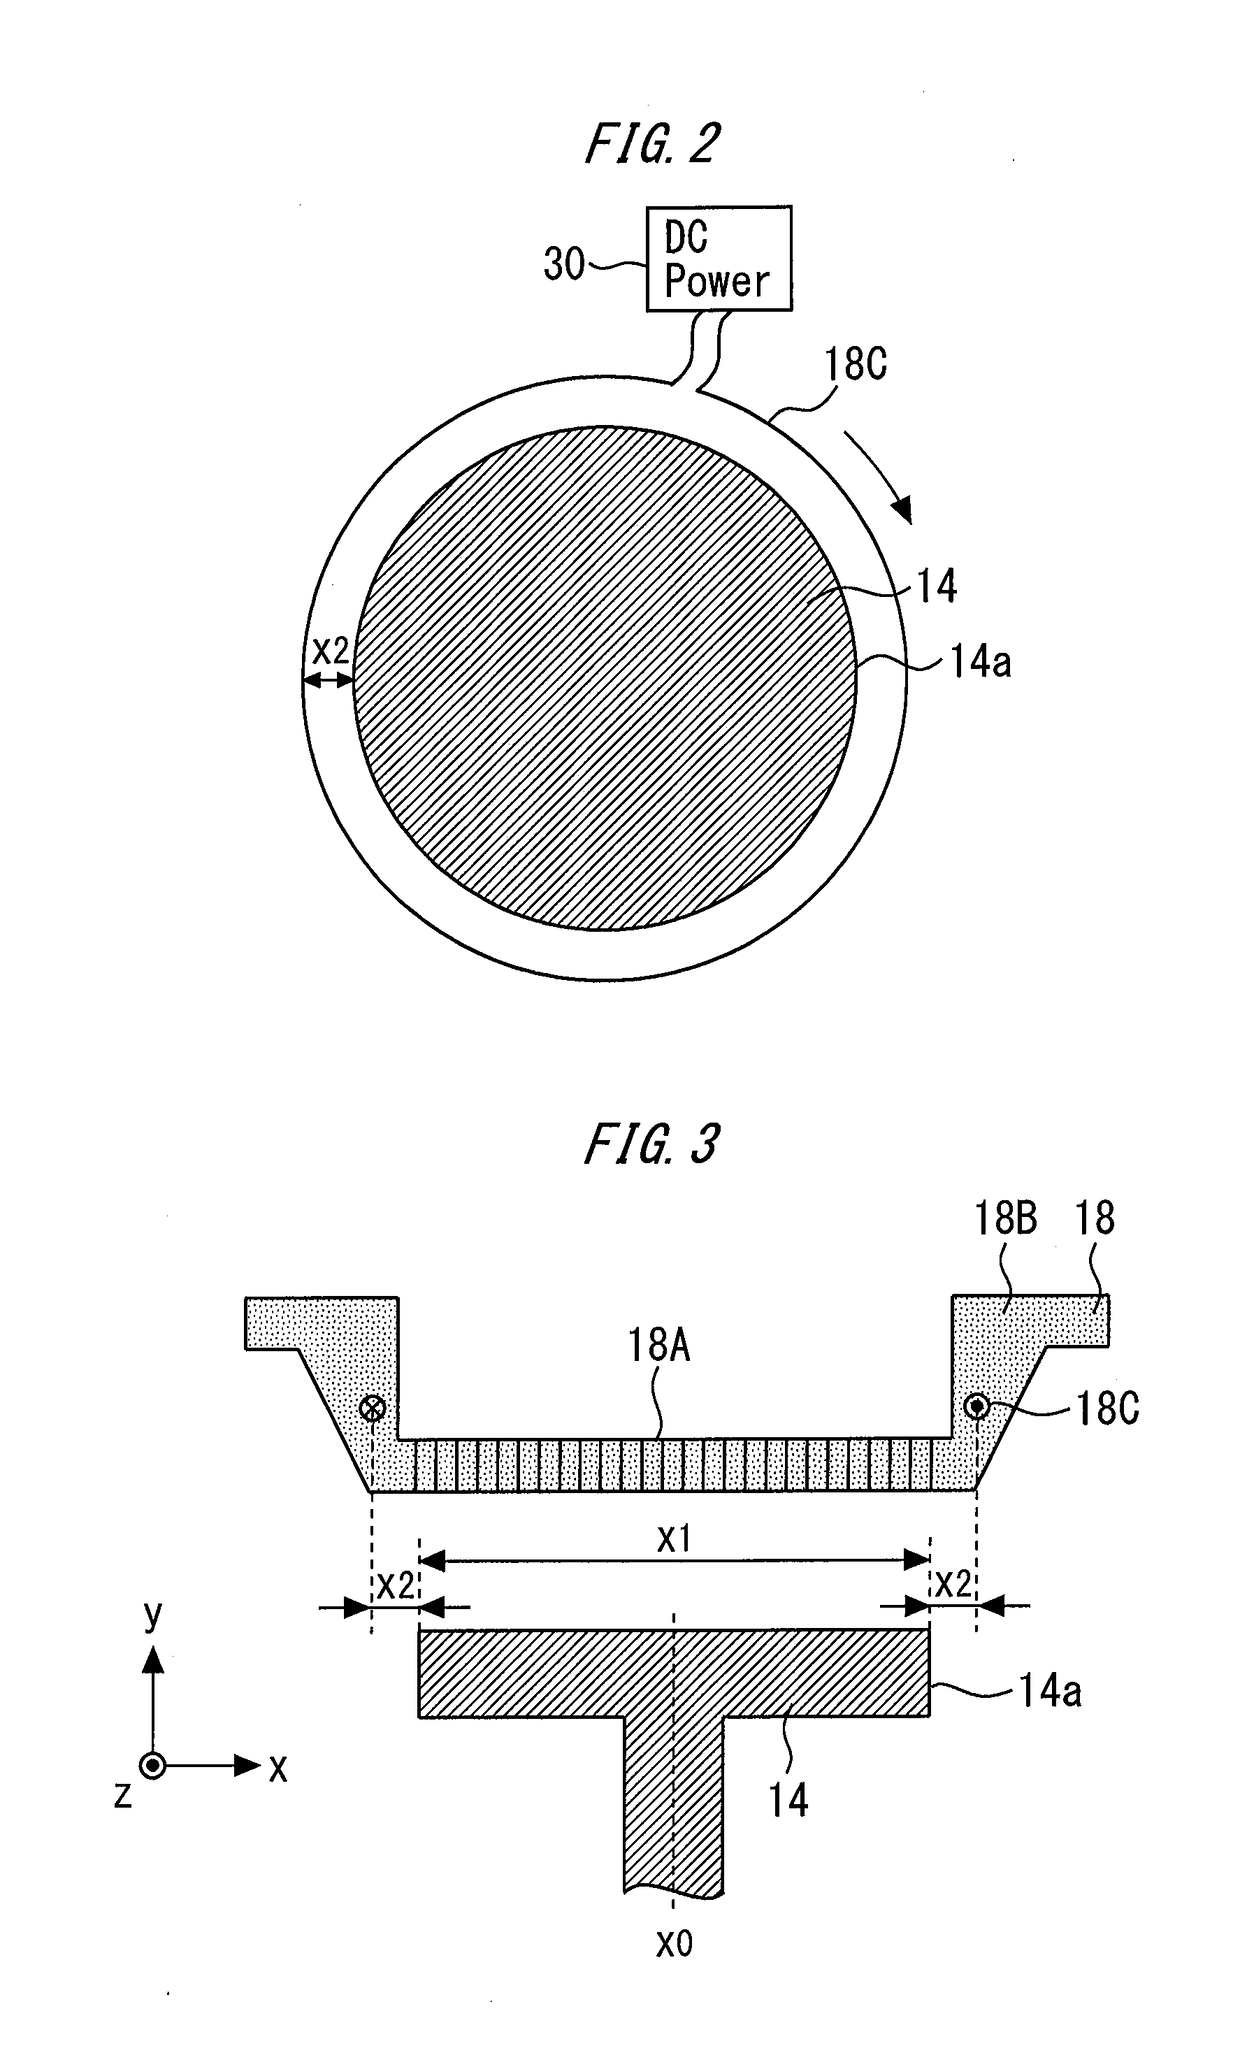 Substrate processing apparatus and method for processing substrate